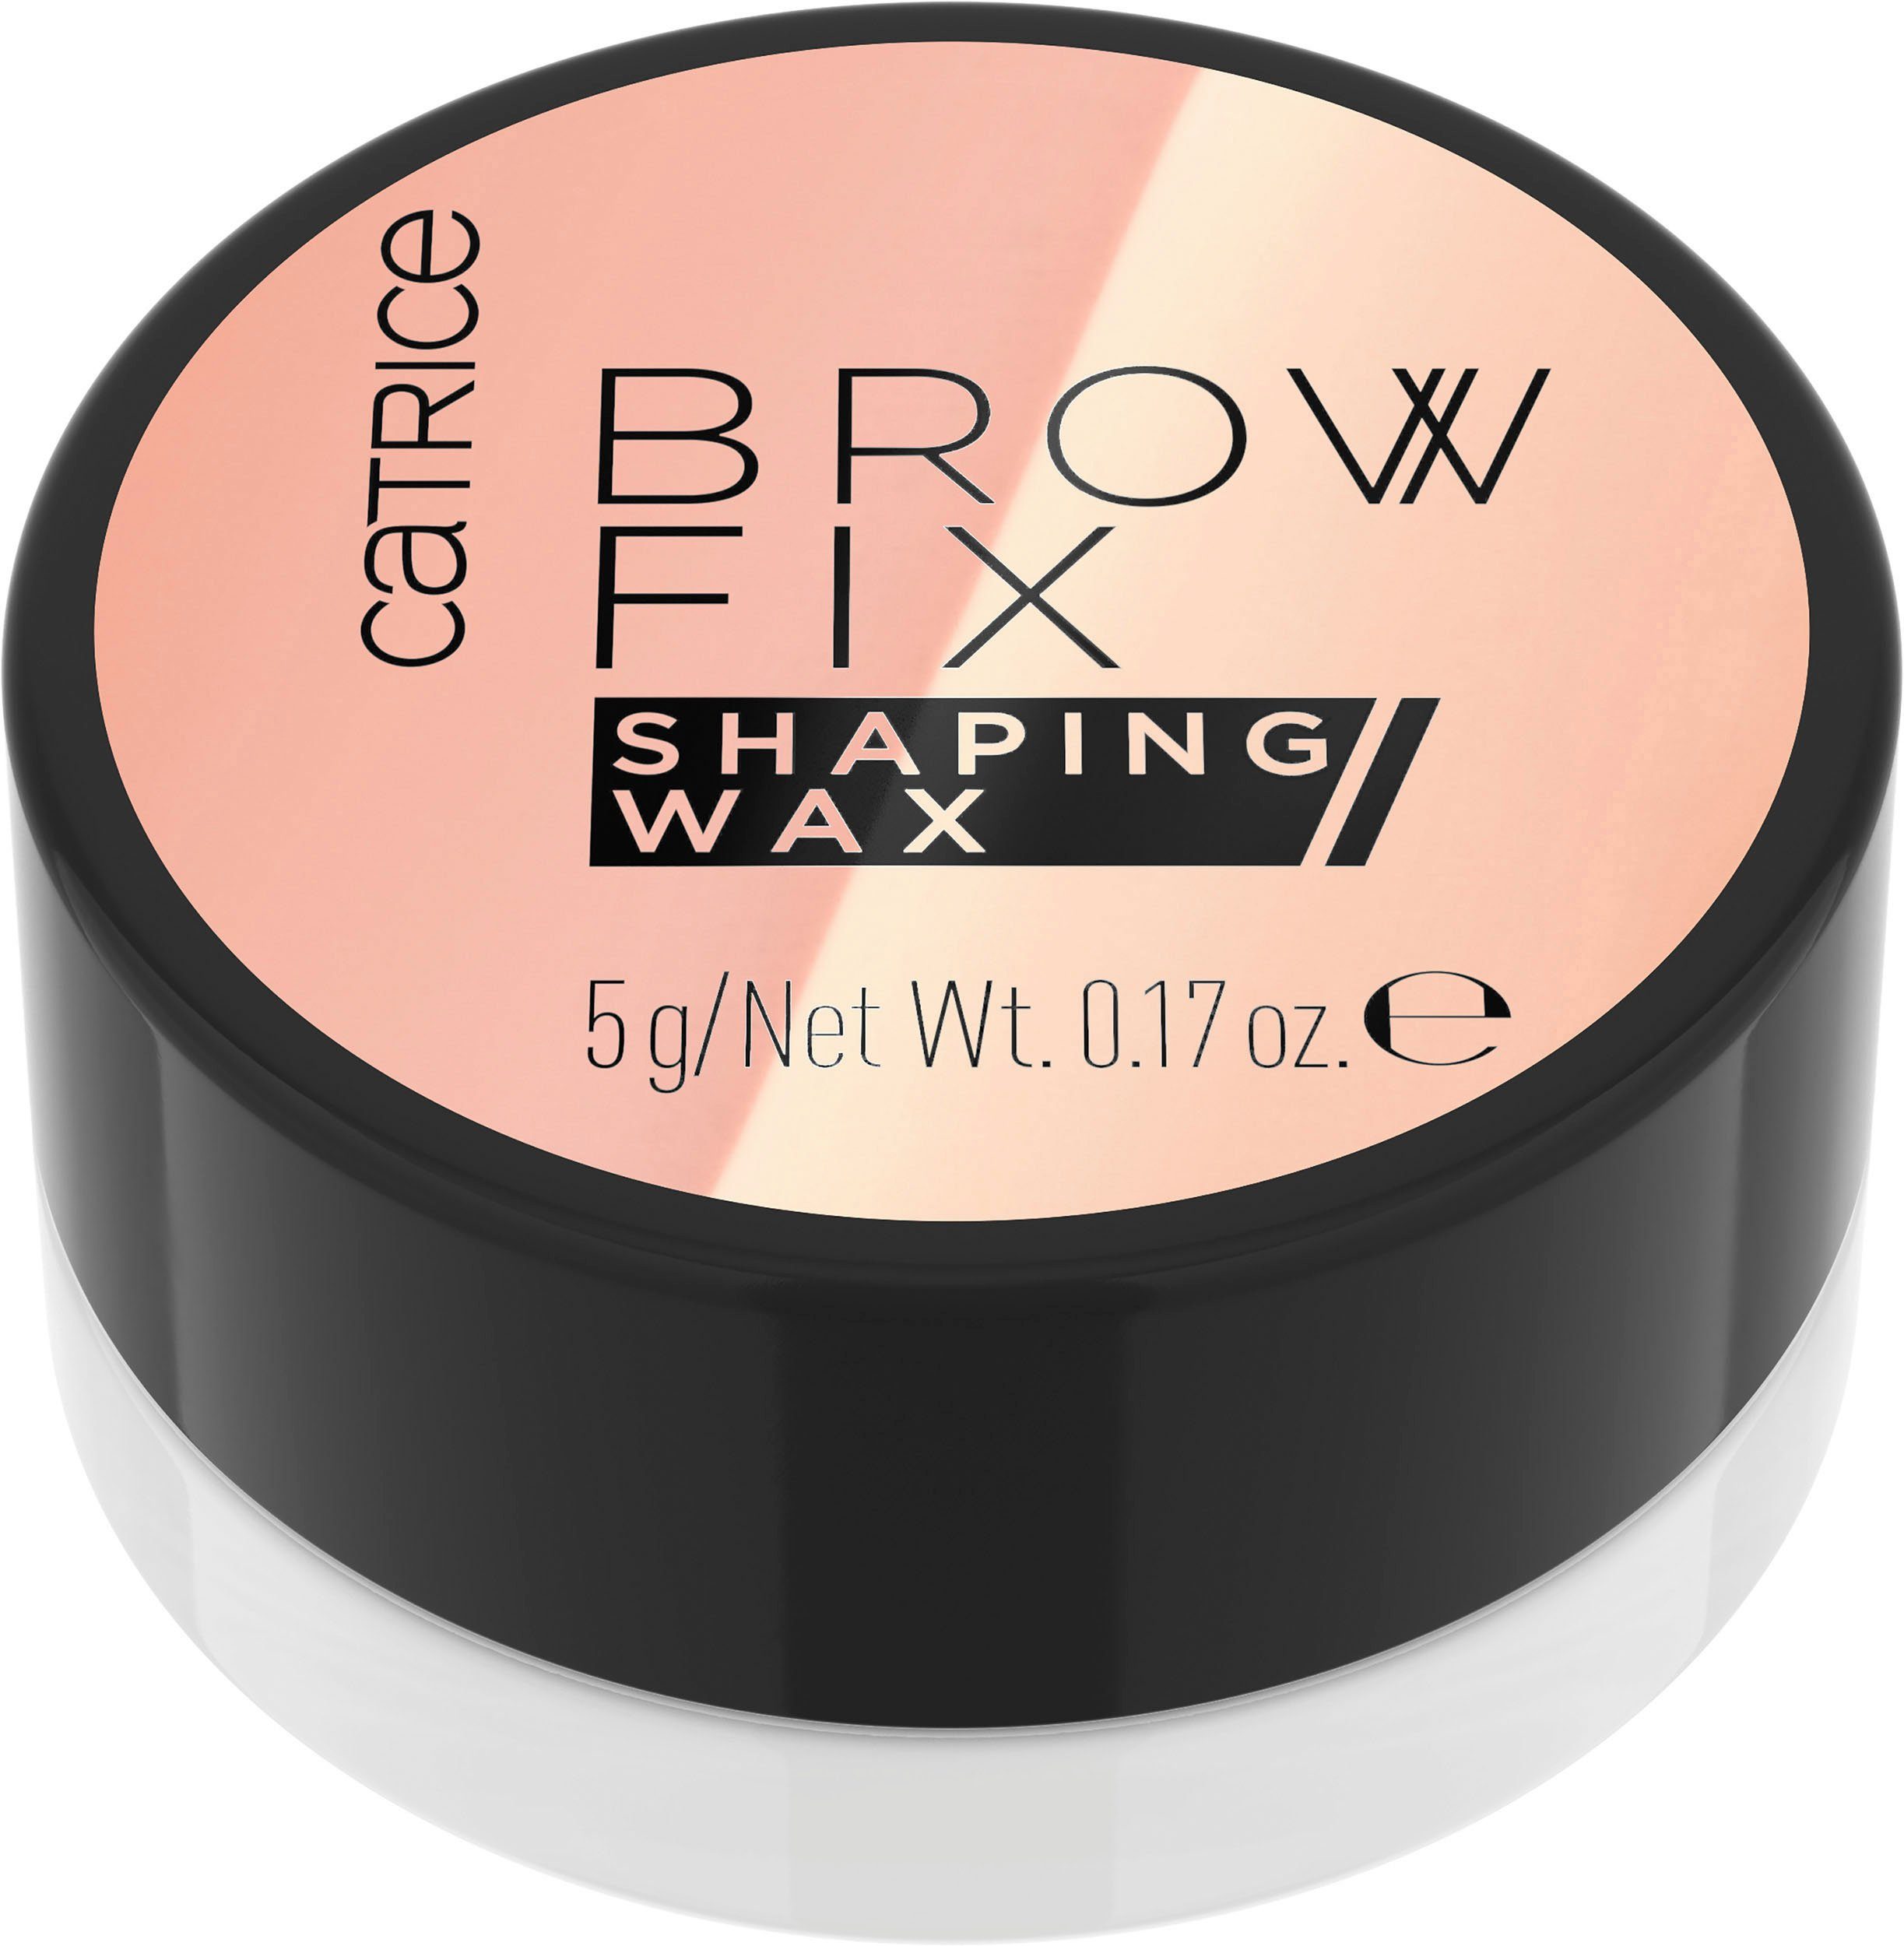 Fix Brow Catrice Catrice Wax Augenbrauen-Gel Shaping 3-tlg. 010,